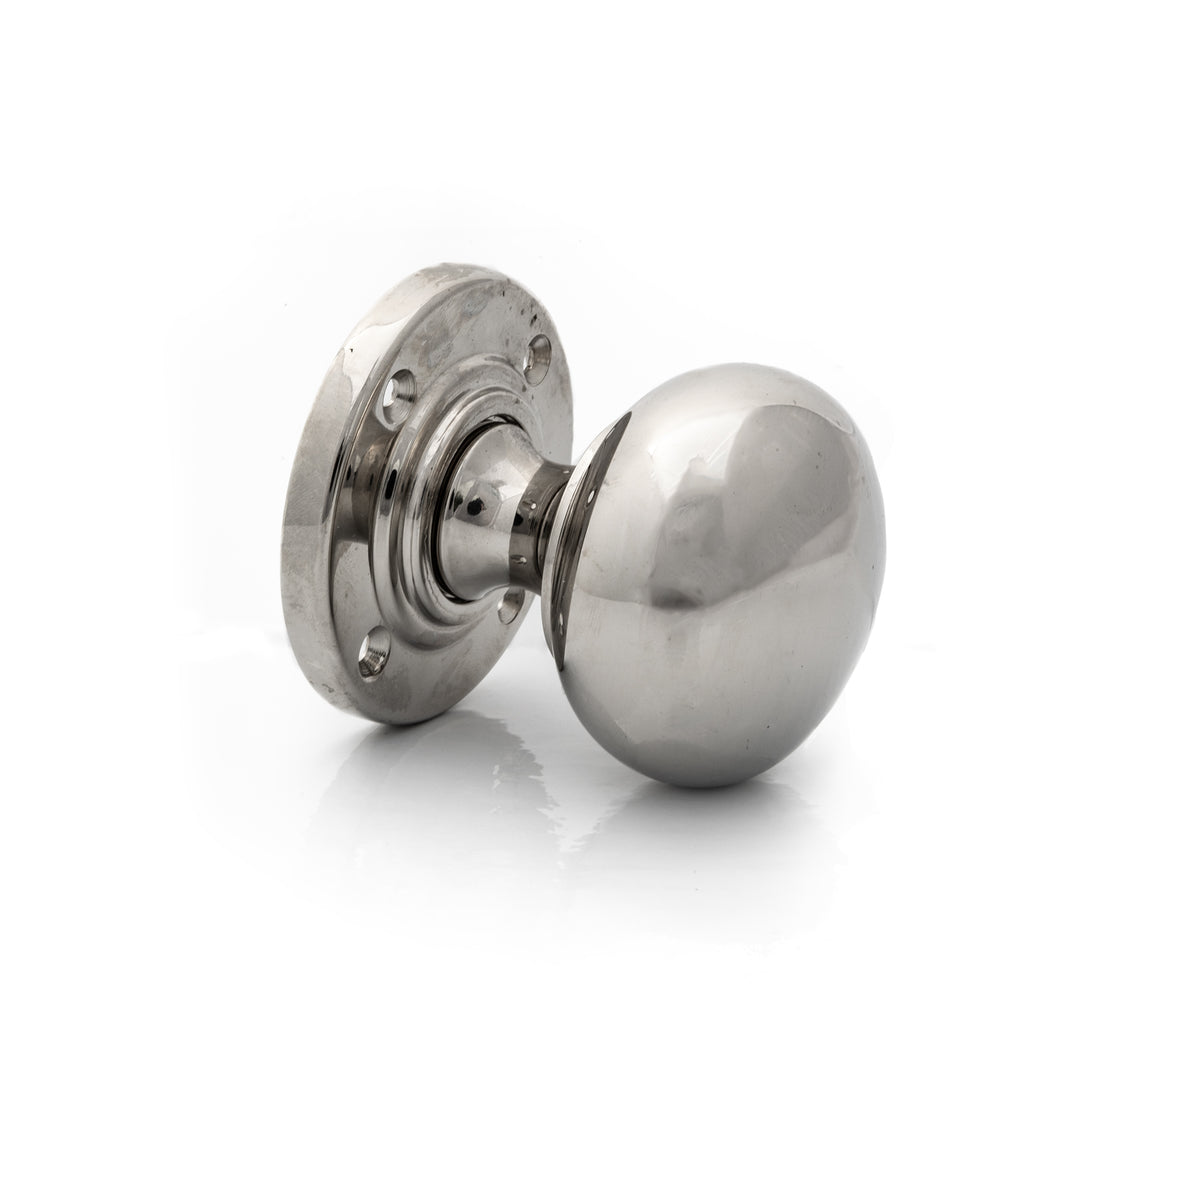 Reclaimed Polished Chrome Door Knob 3 Available | The Architectural Forum